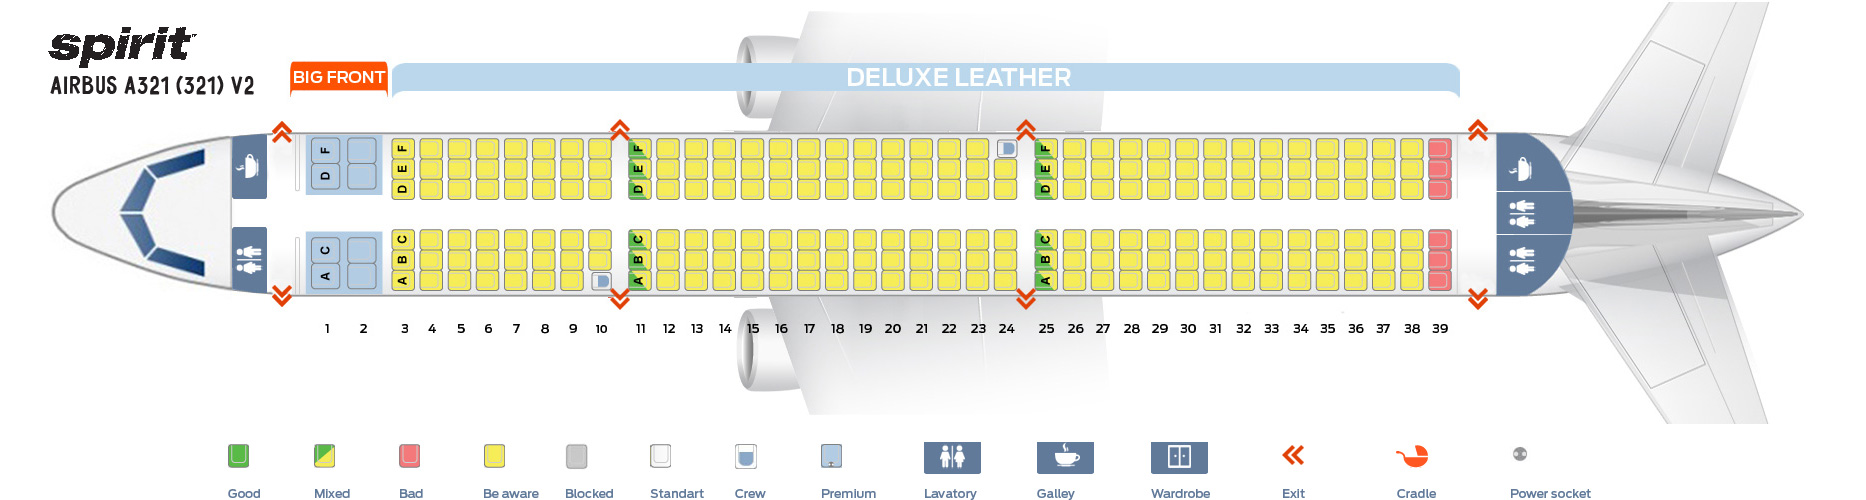 Seat map Airbus A321200 Spirit Airlines. Best seats in